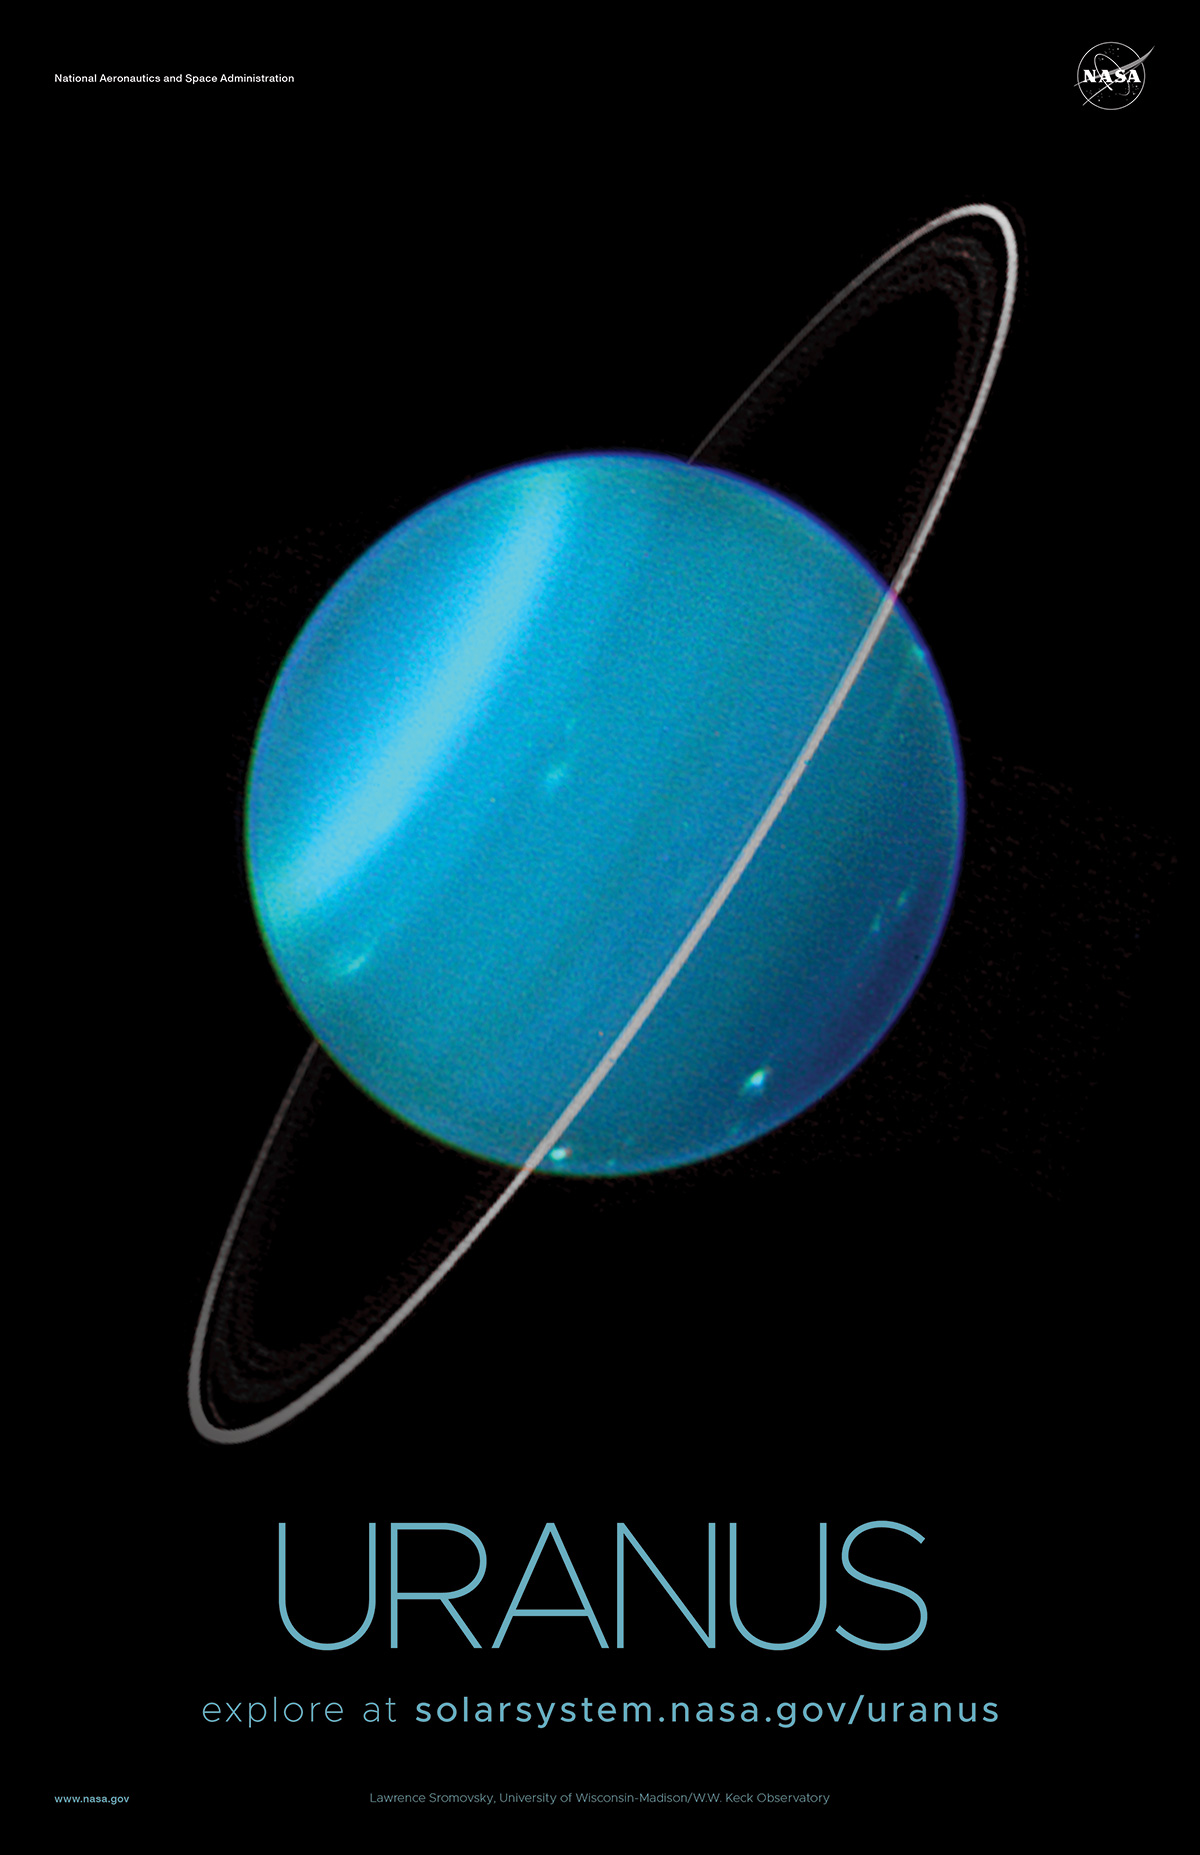 Poster view of Uranus with its rings.